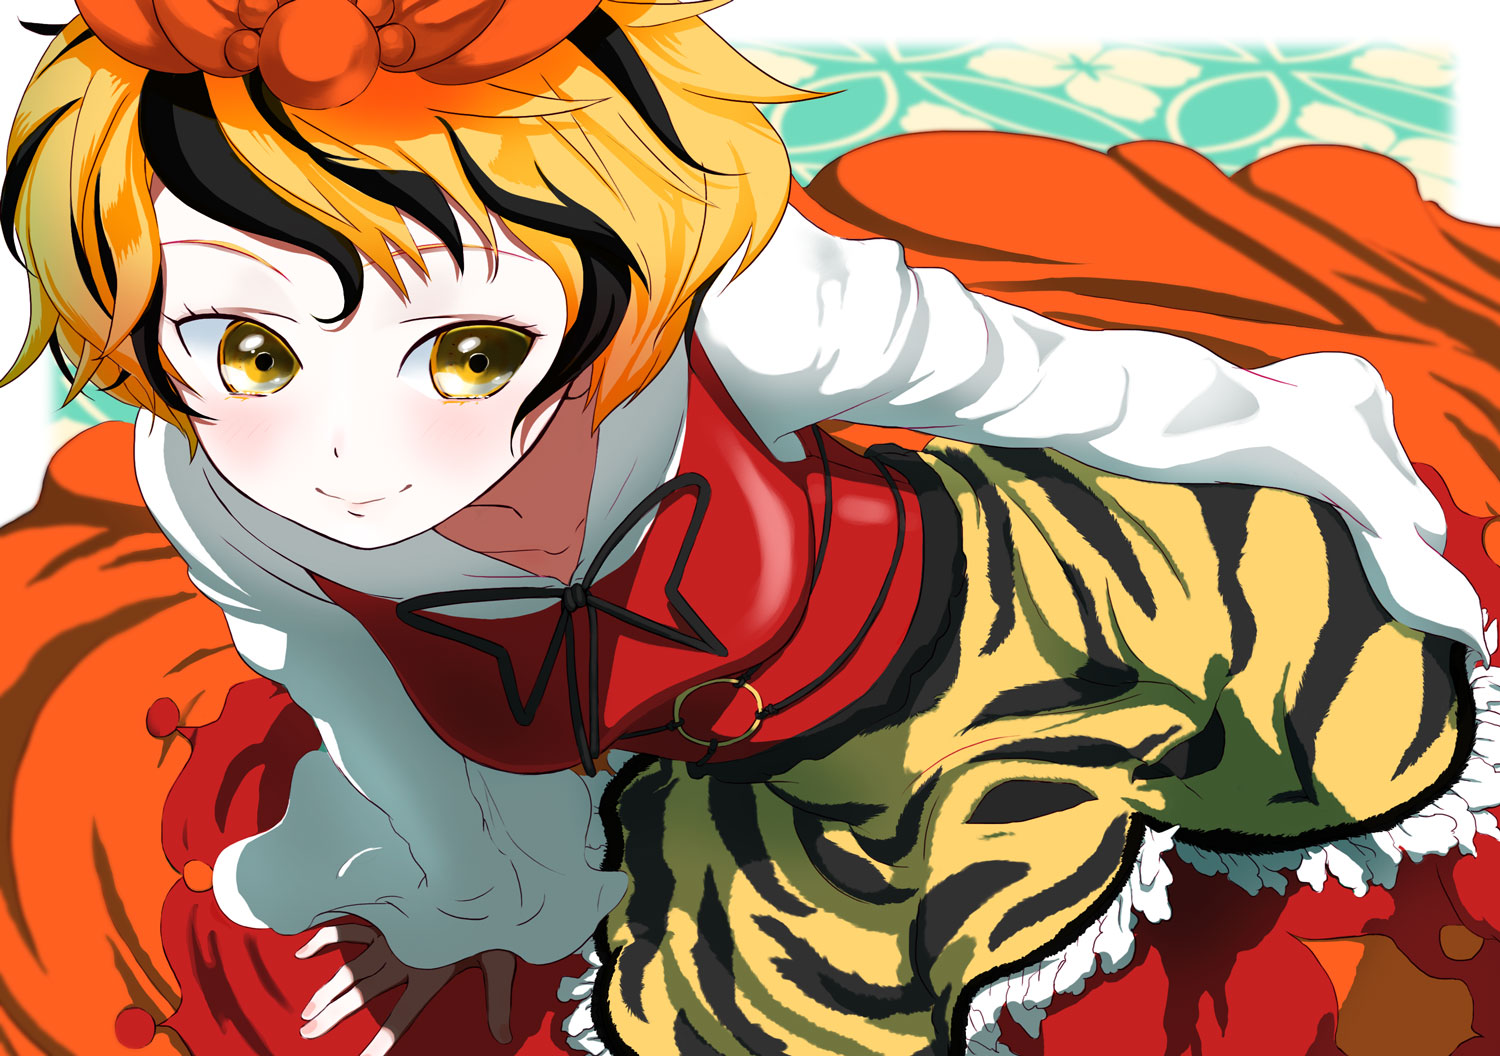 Shou Toramaru, fierce Anime character from Touhou, featured in this captivating desktop wallpaper.